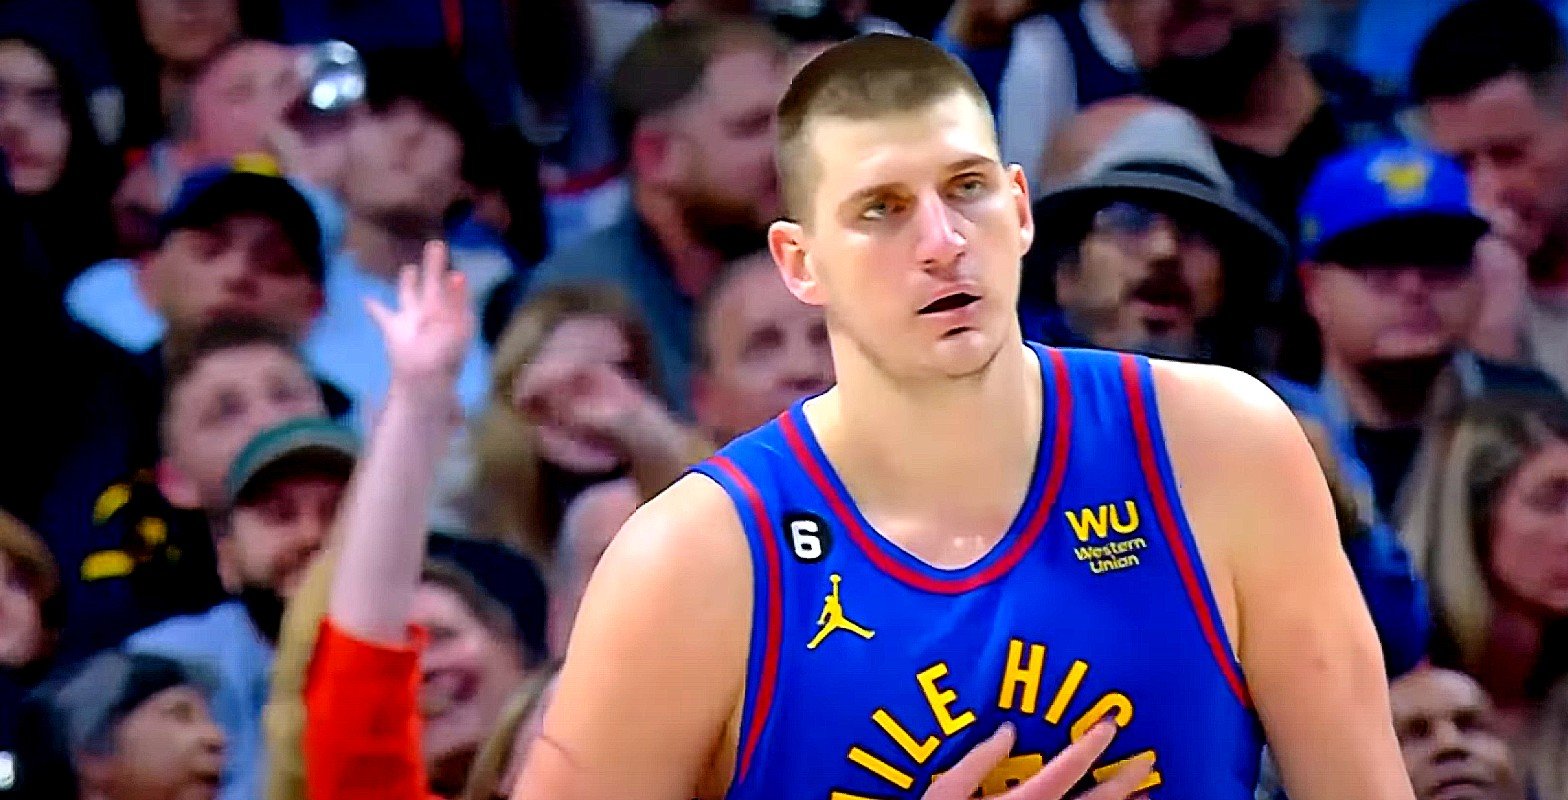 Nikola Jokic for the Denver Nuggets gets another triple-double